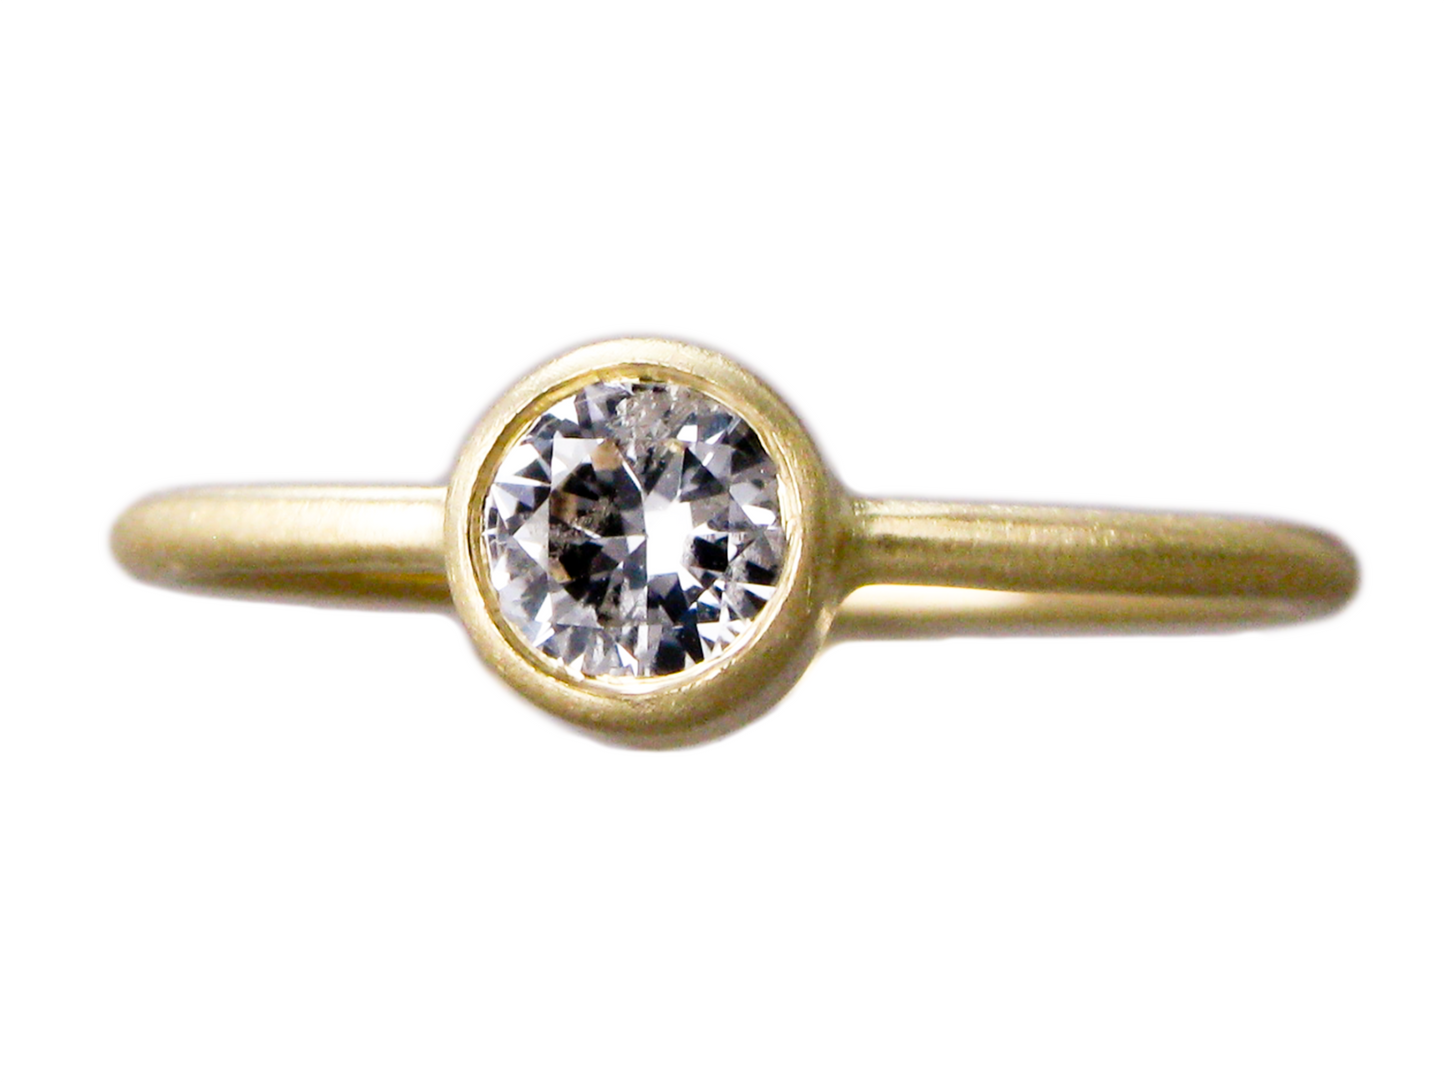 White Sapphire Engagement Ring, Round Straight Sided Bezel and a Delicate 1.3mm Round Band | 3-6mm Sapphire in 14k Gold